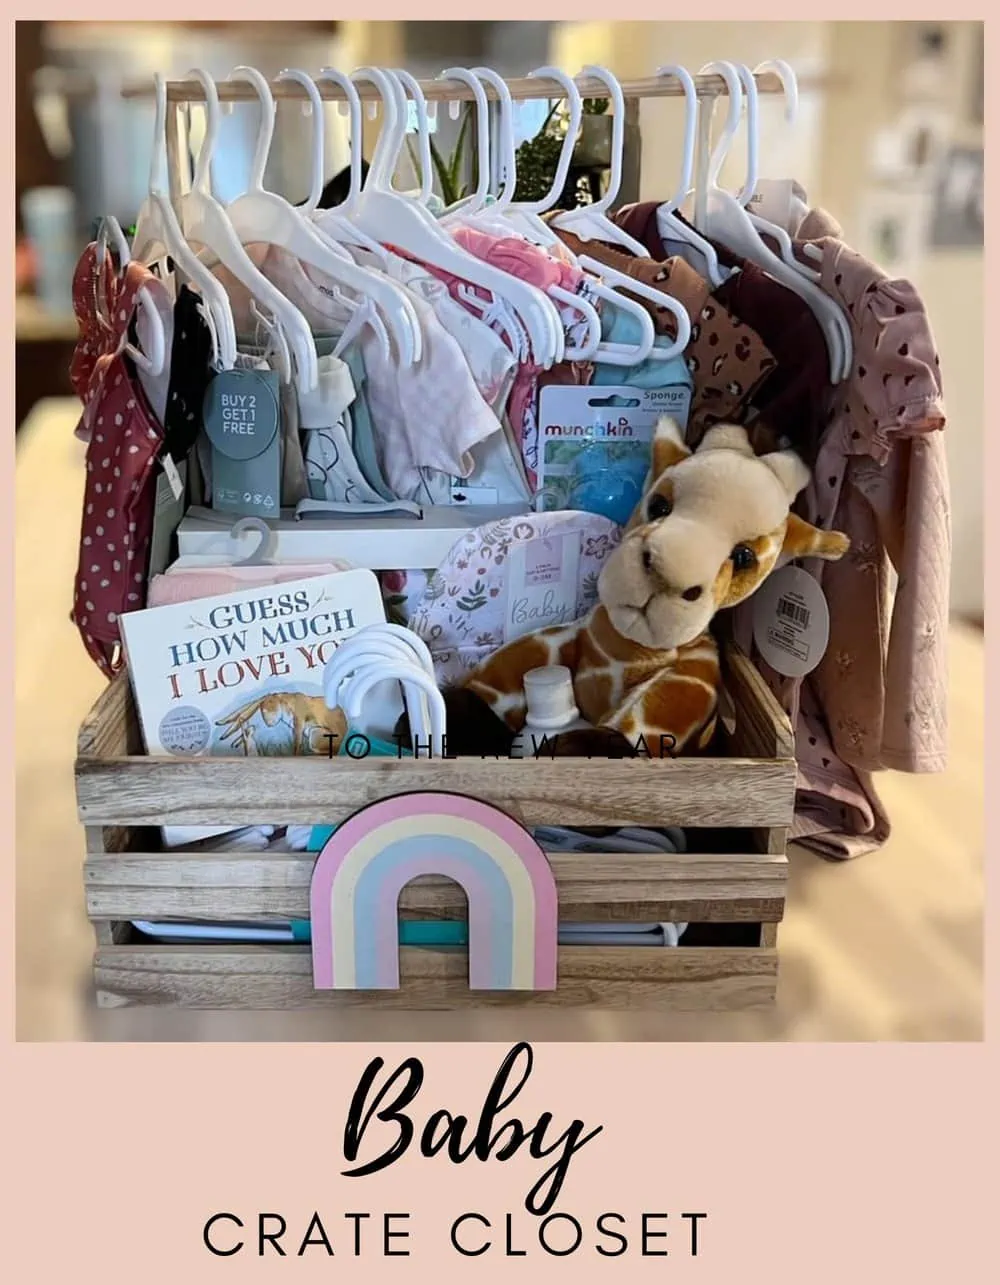 Make A Baby Crate Closet for Baby Shower Gift! - Thrifty NW Mom